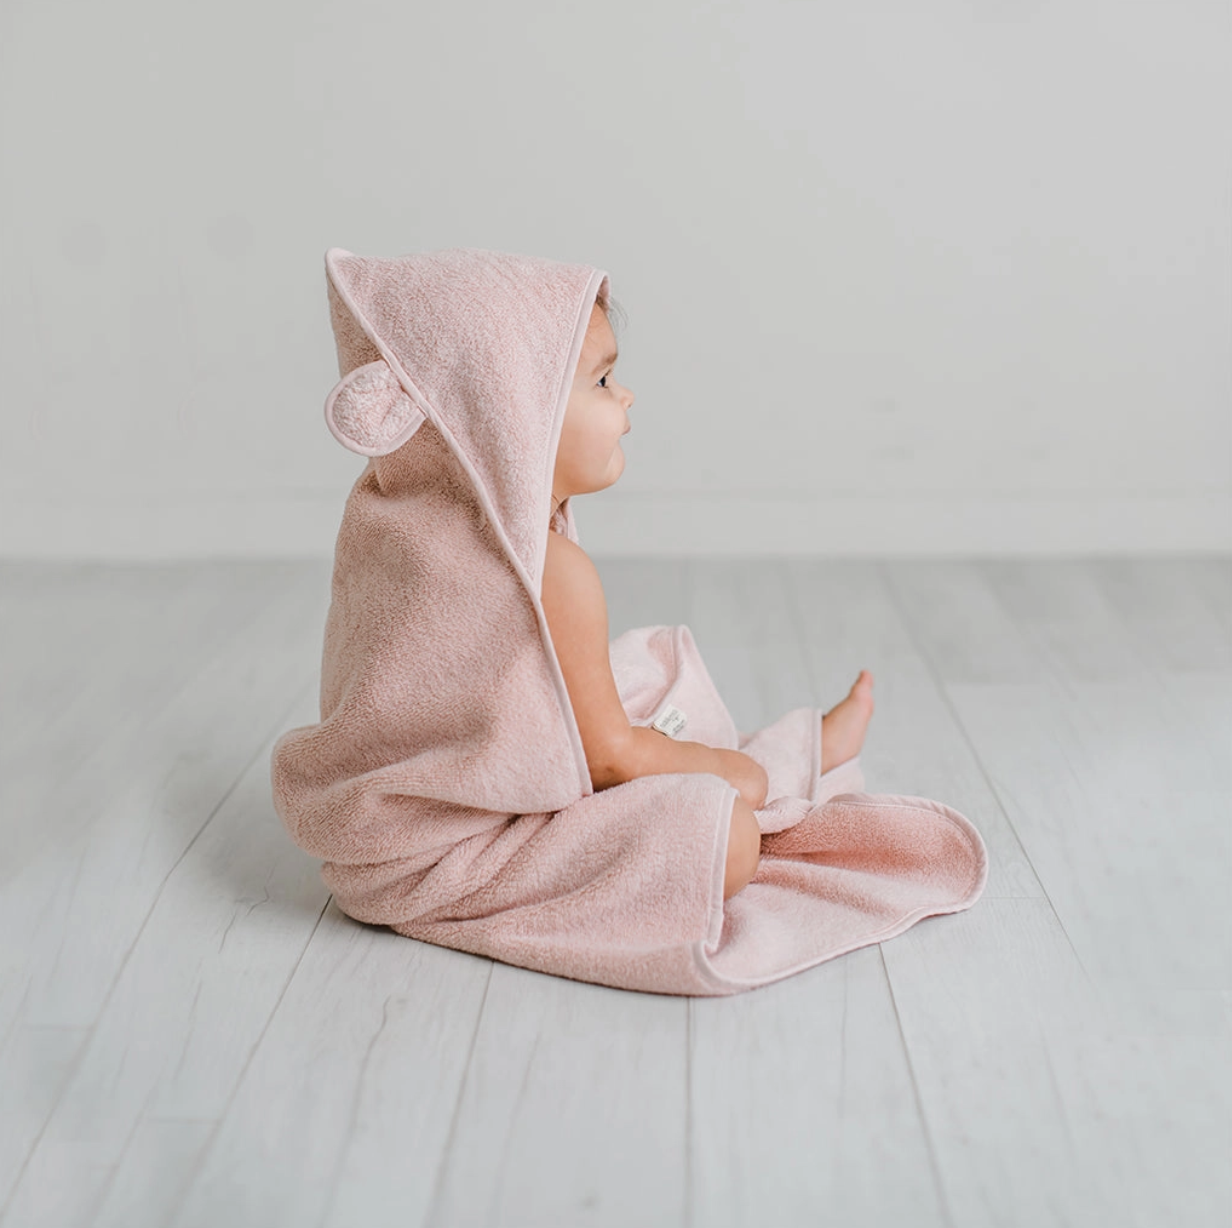 Load image into Gallery viewer, Organic Cotton Hooded Towel For Babies and Toddlers - Pink
